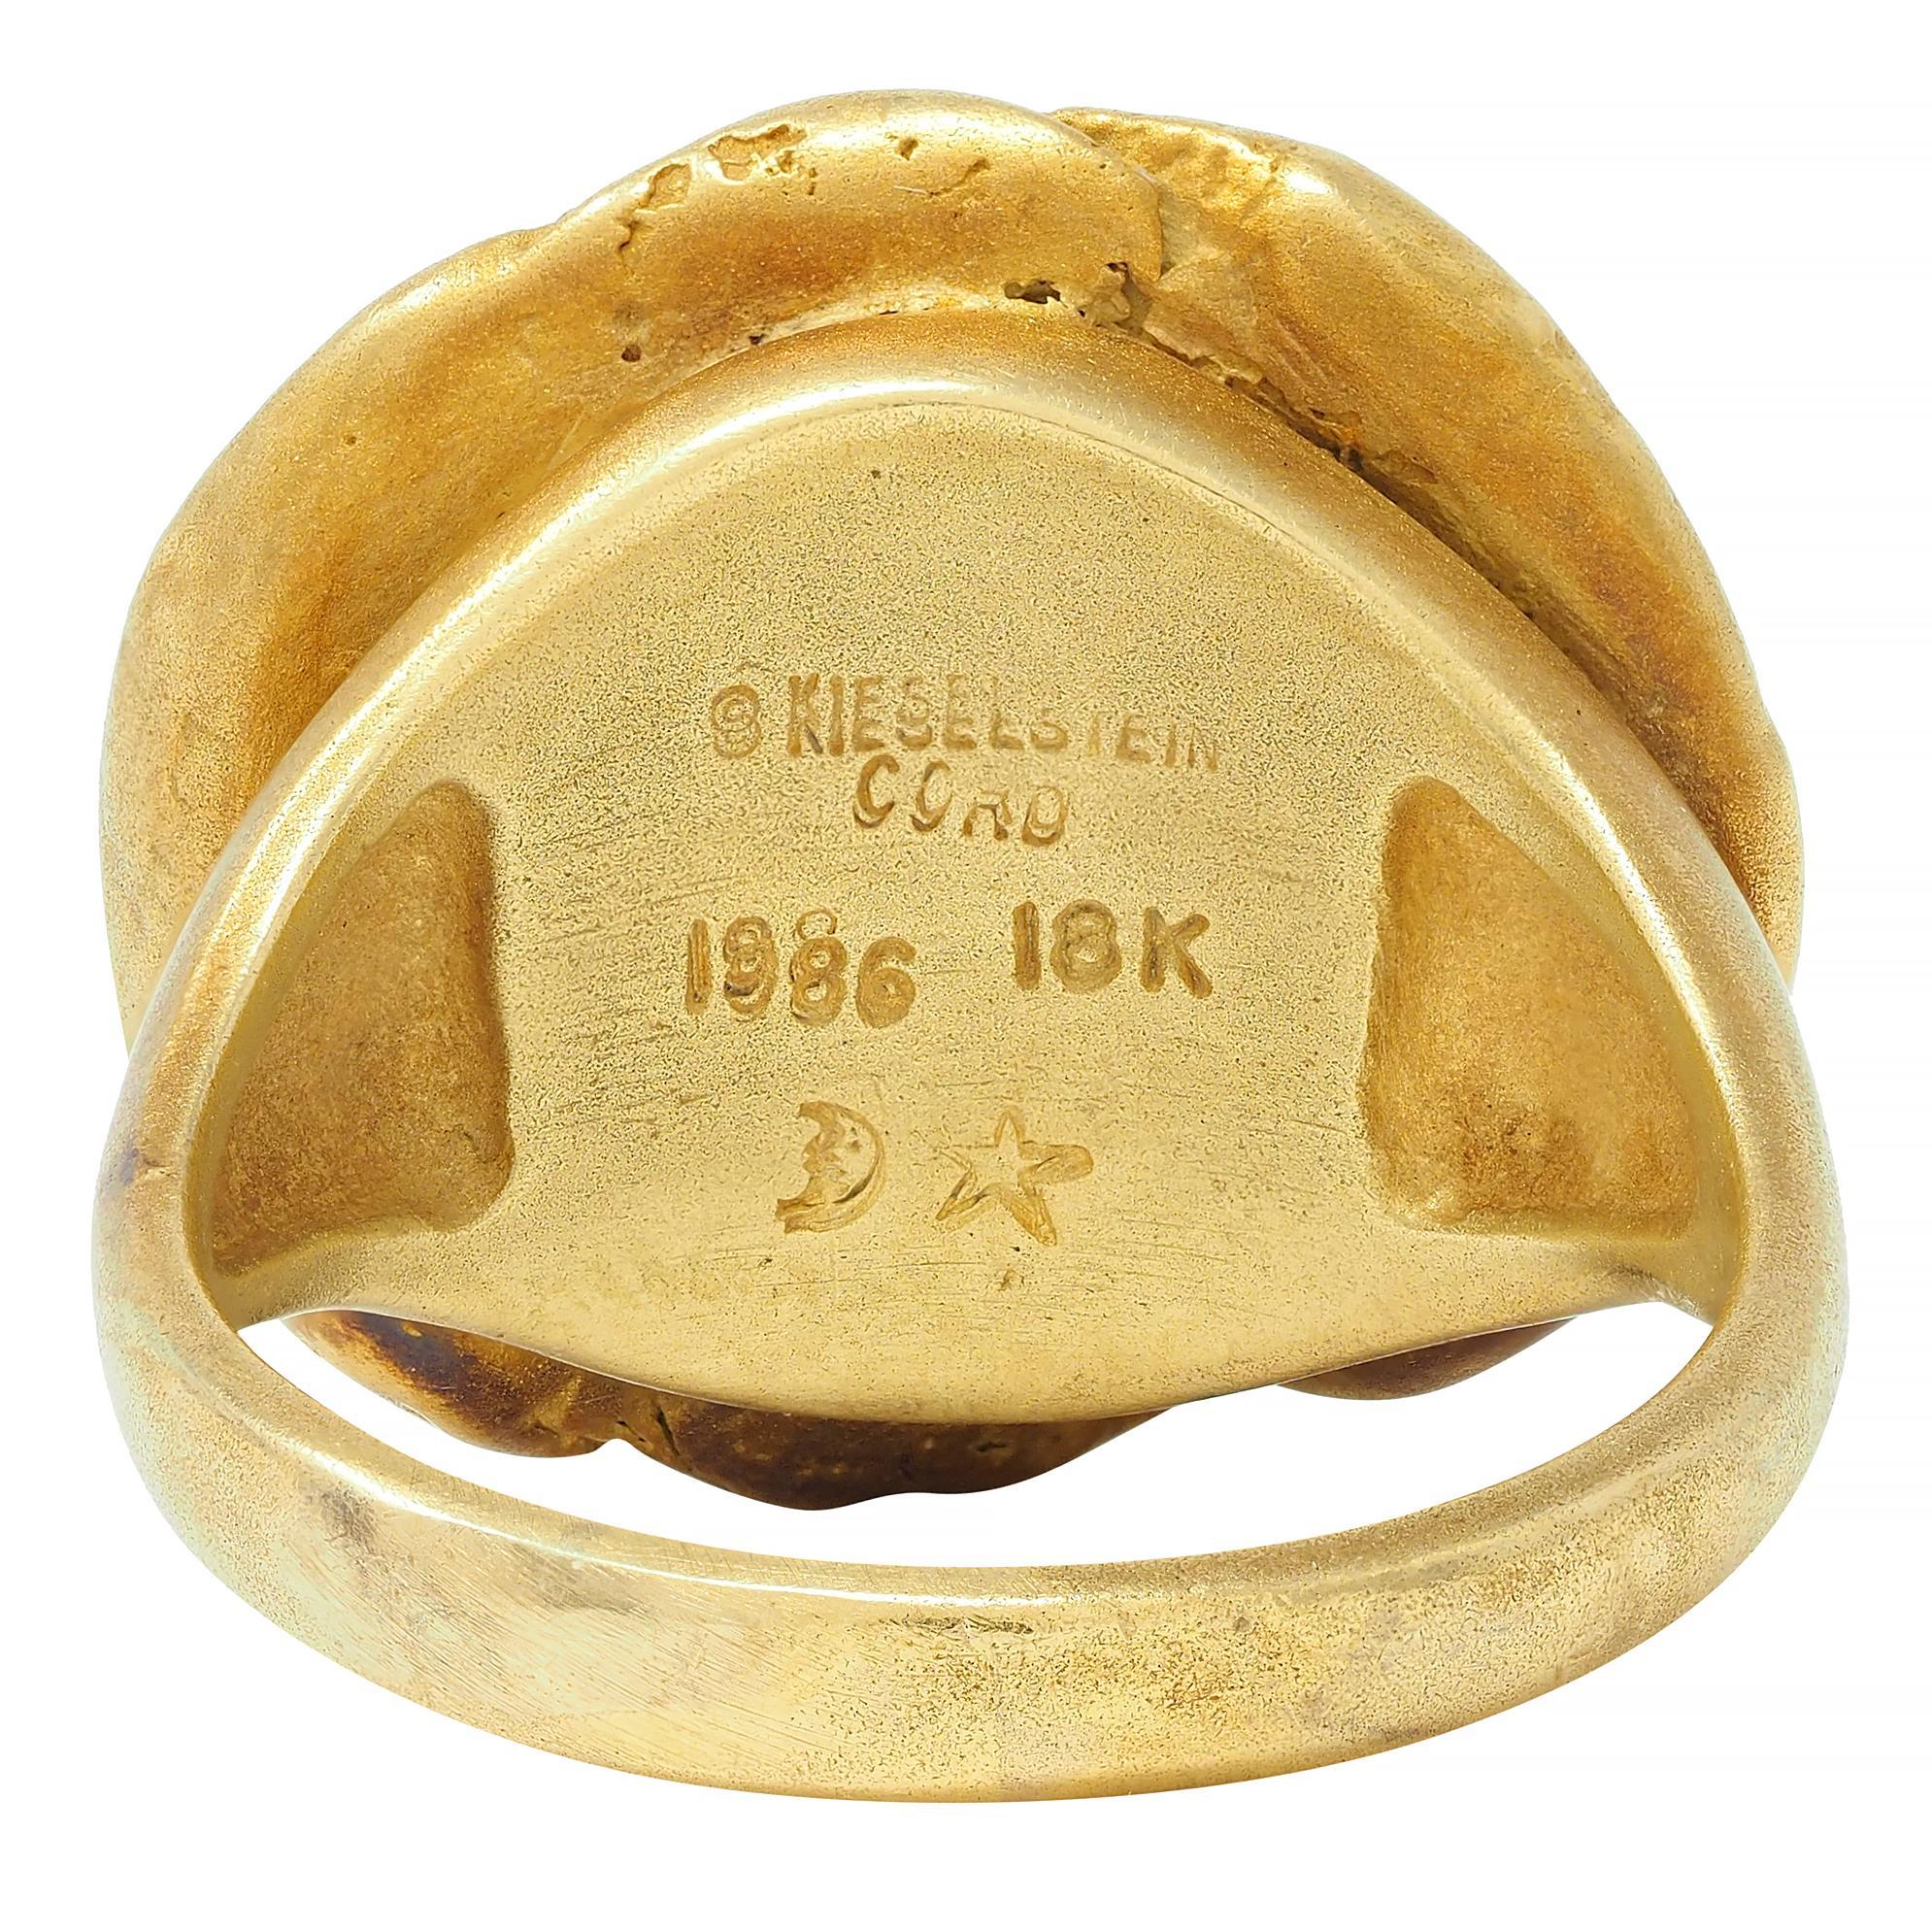 Kieselstein-Cord 18K Yellow Gold Abstrac Animal Intaglio Vintage Signet Ring For Sale 1